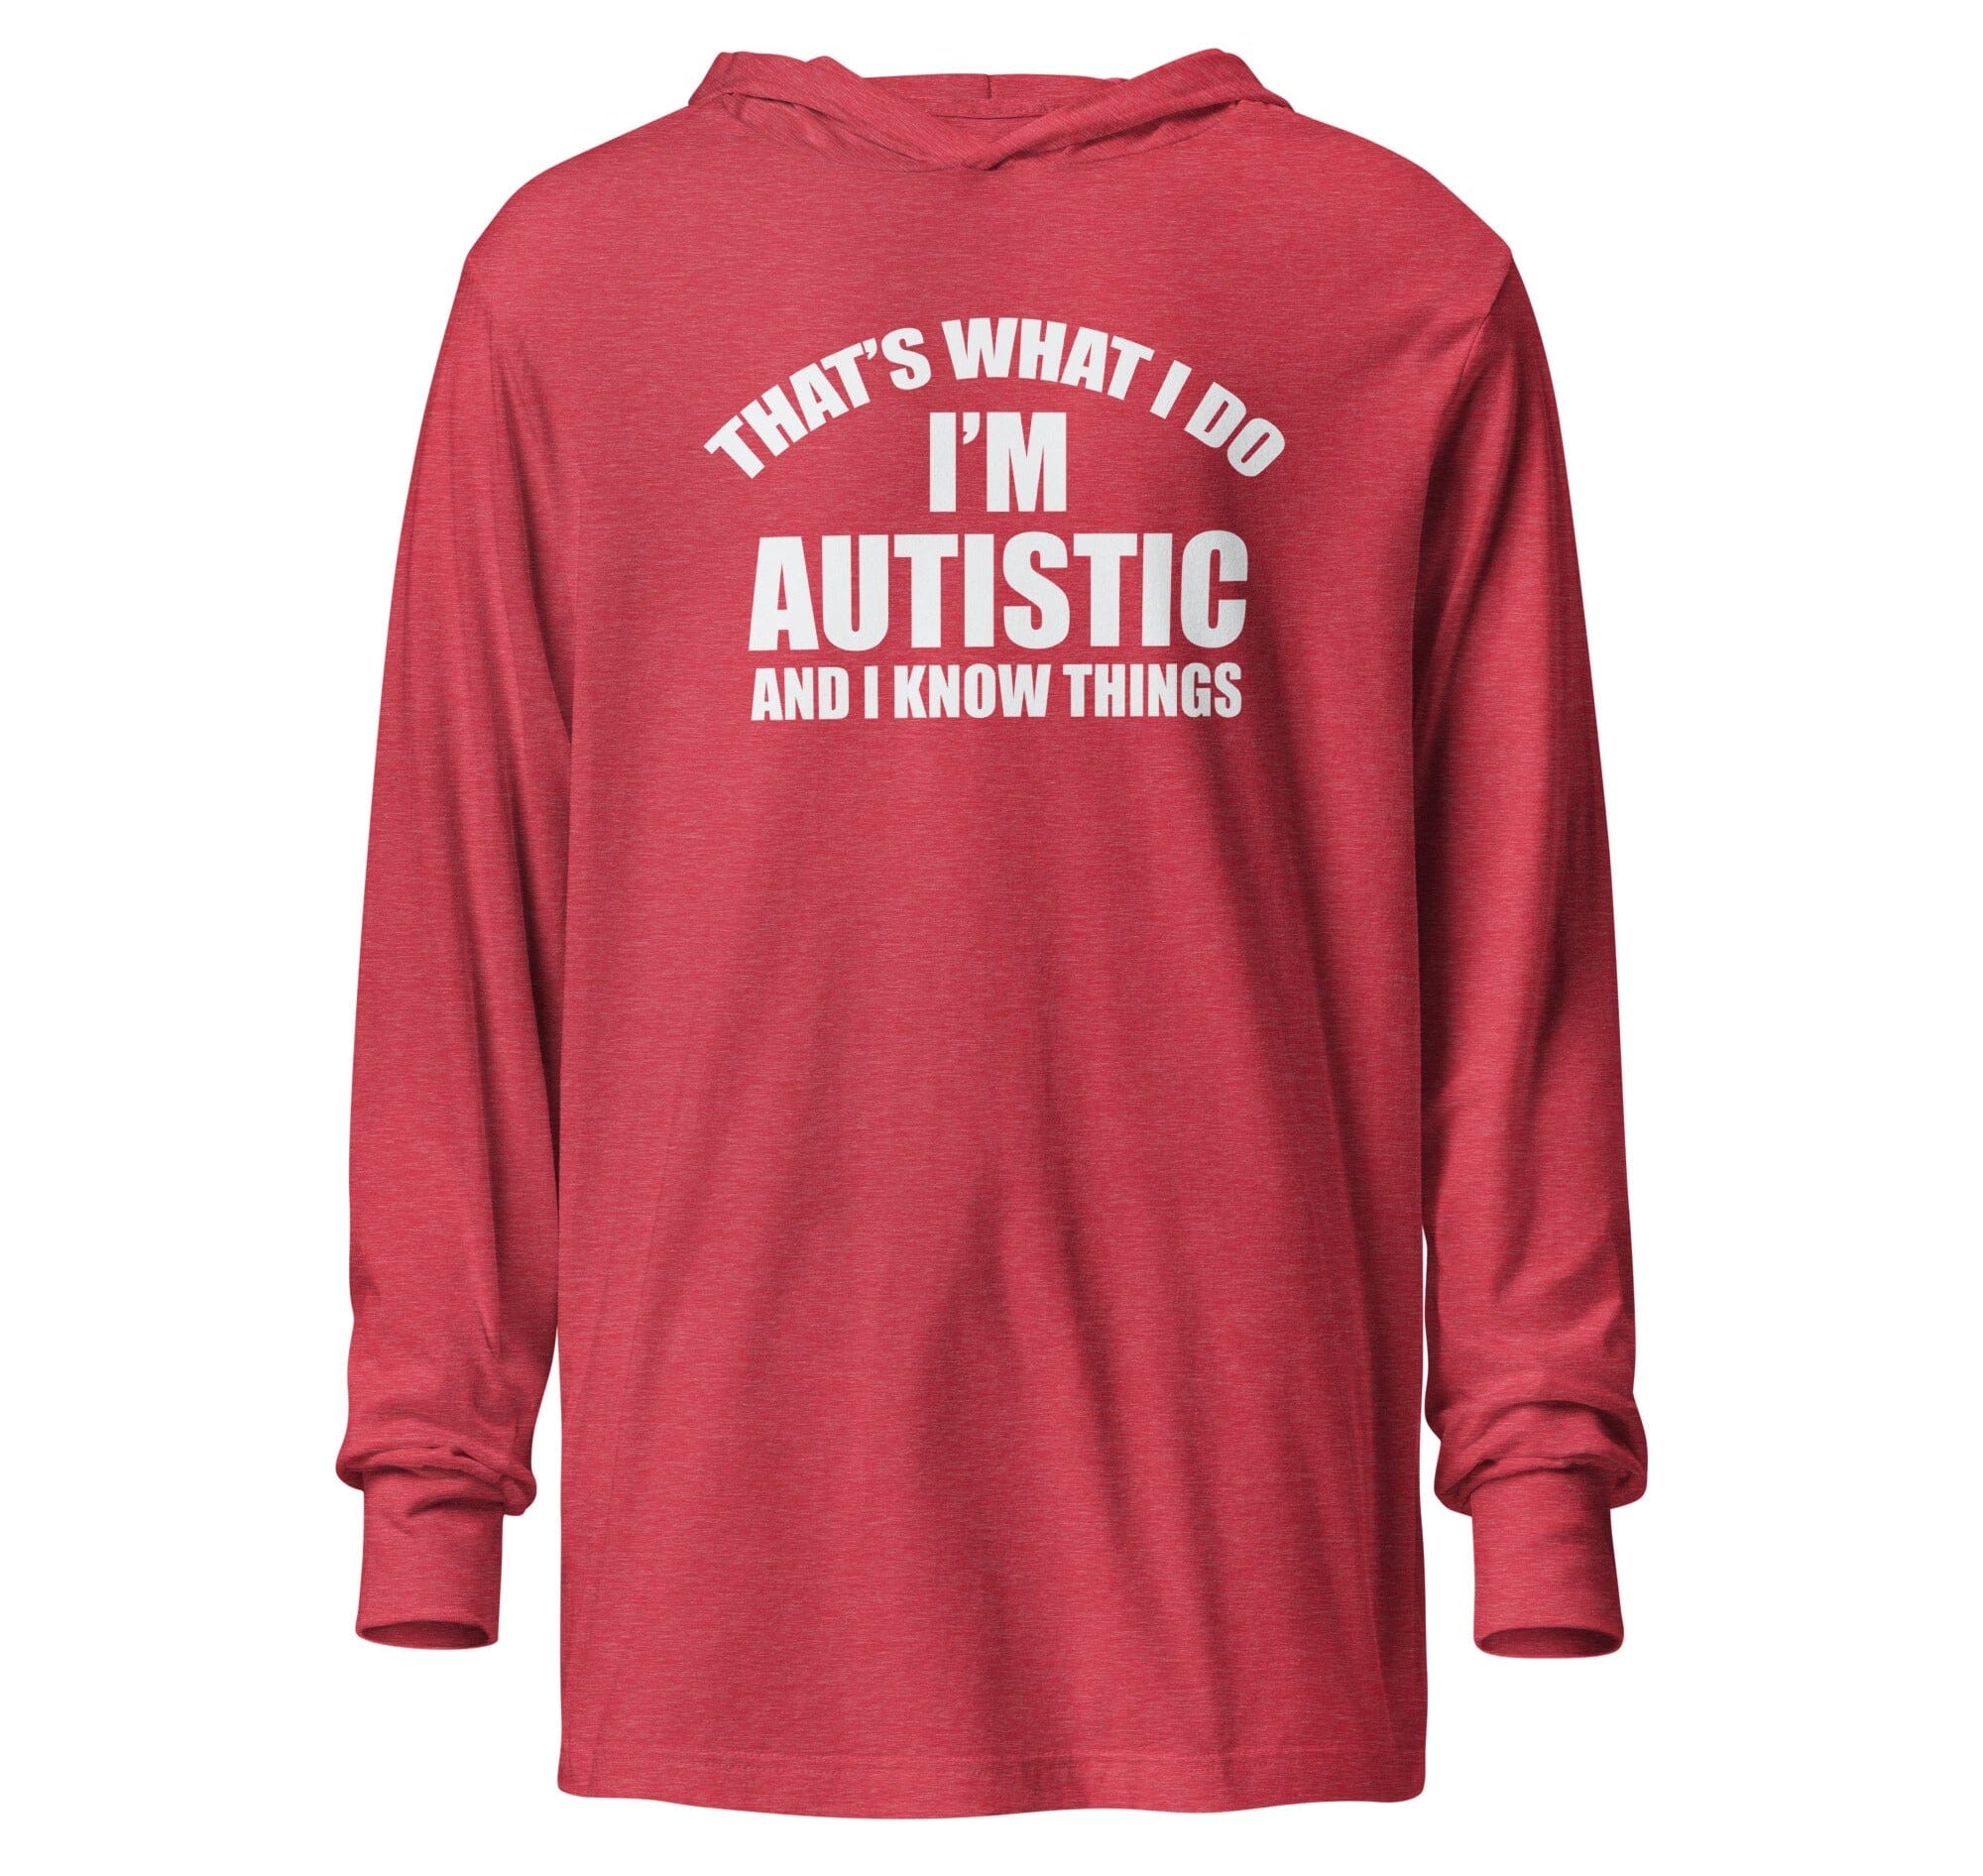 That's What I Do, I'm Autistic and I Know Things Unisex Hooded long-sleeve tee The Autistic Innovator Heather Red XS 